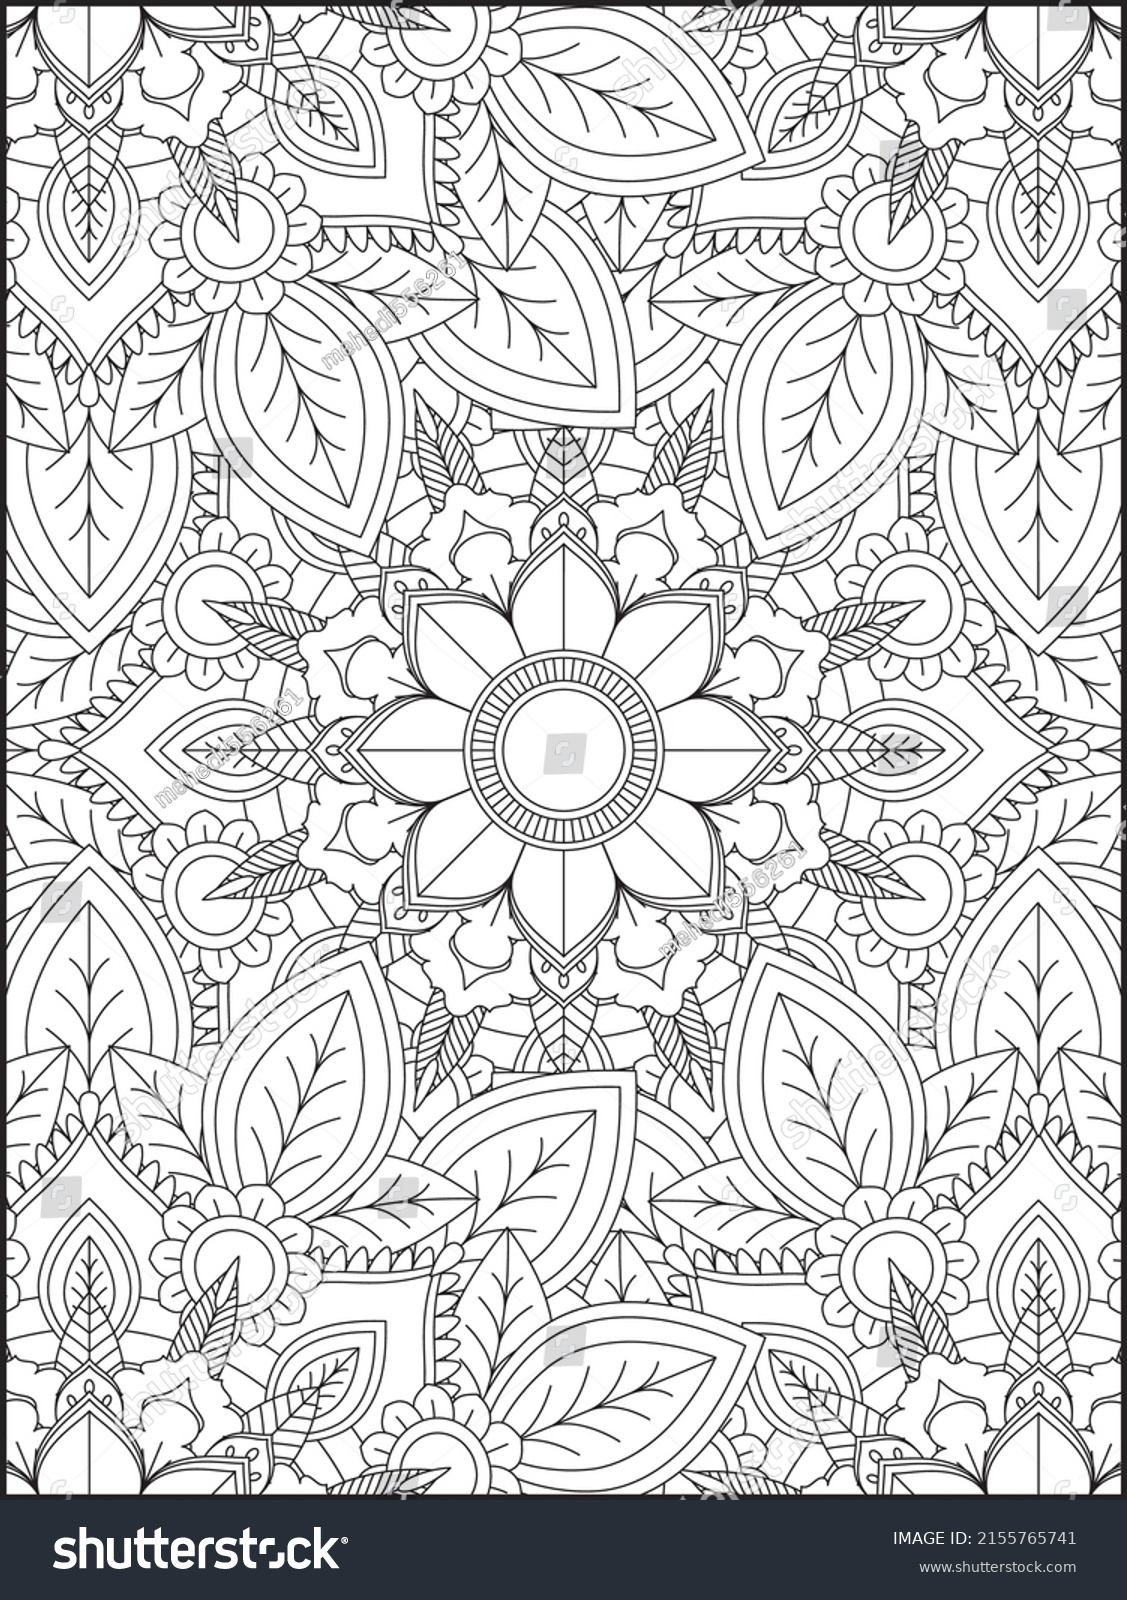 Adult Coloring Pages Adult Coloring Books Stock Vector (Royalty Free ...